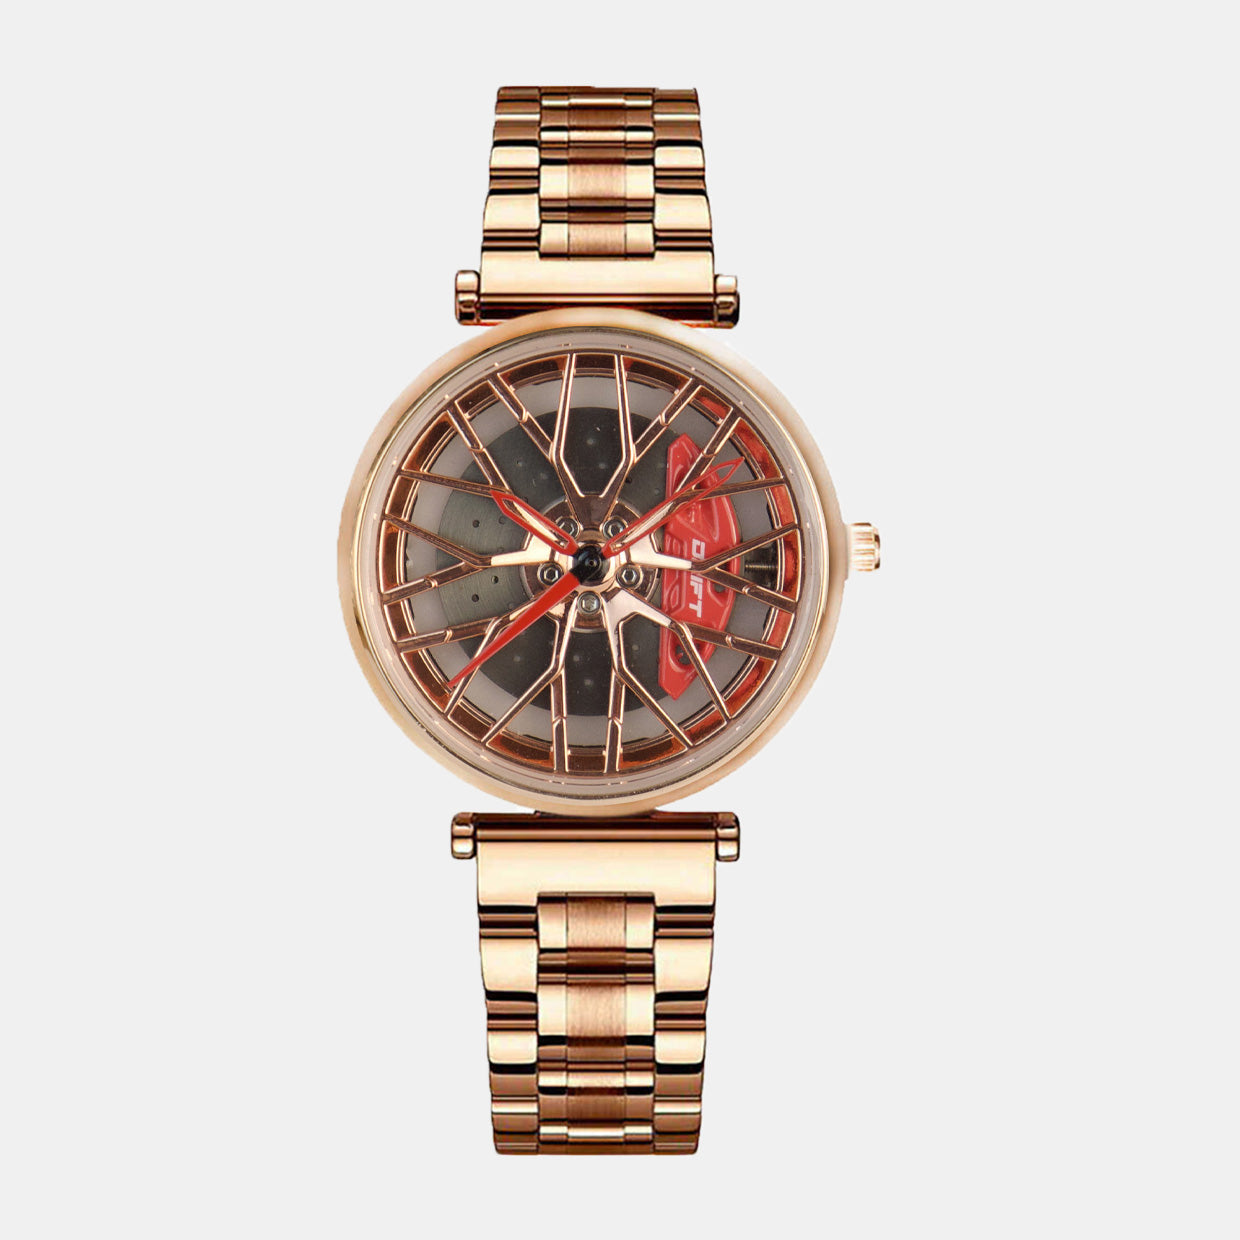 This image displays a ladies' motorsport-inspired watch in a rose-gold tone offered by DriftElement, a German startup specializing in innovative rim-design watches. The watch features a detailed dial that emulates the look of a car rim, complete with red accents that add a vibrant touch to the overall aesthetic. The rose-gold metal bracelet complements the design, creating a sophisticated yet edgy piece of wristwear that blends automotive passion with fashion-forward styling. #id_47362139914570